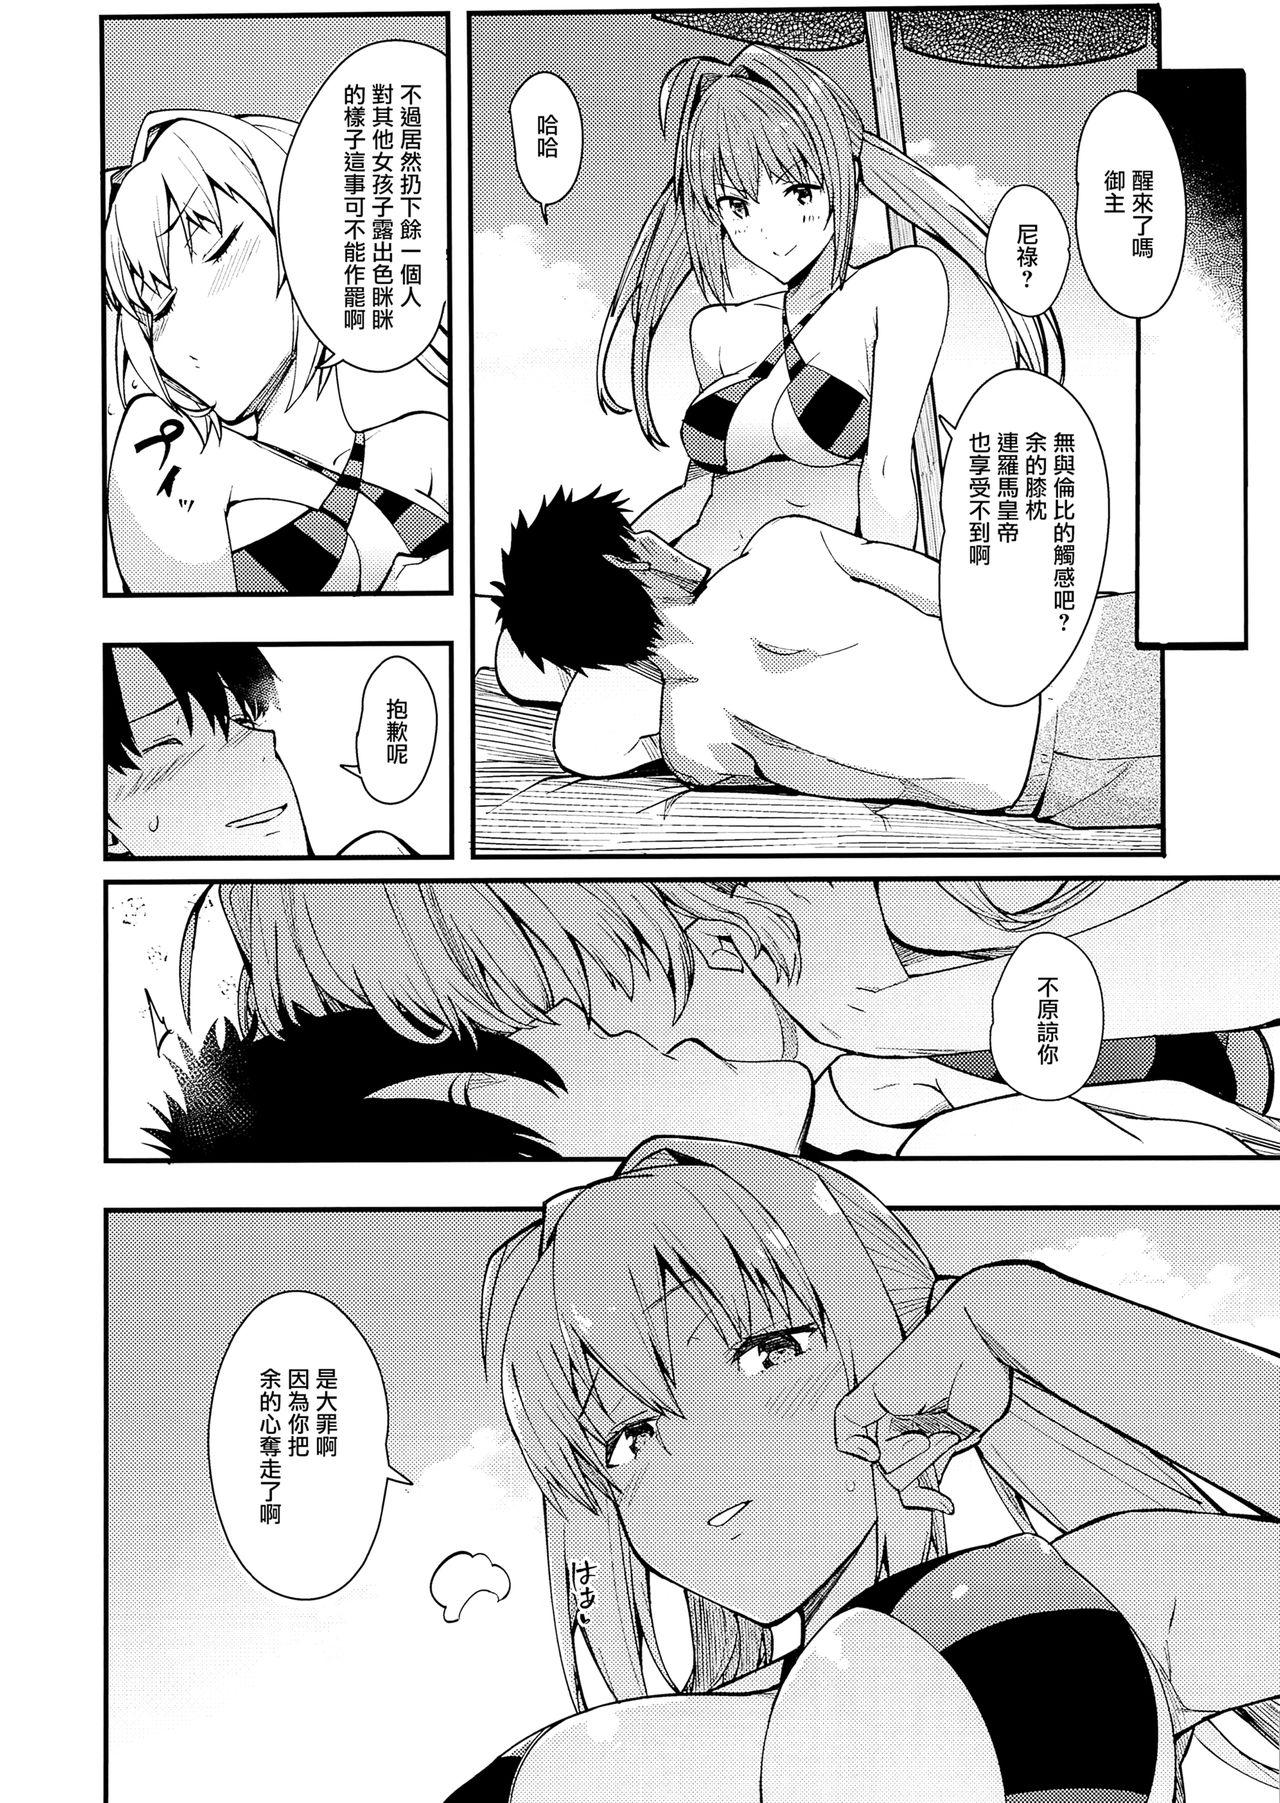 Spooning Nero to - Fate grand order Students - Page 10